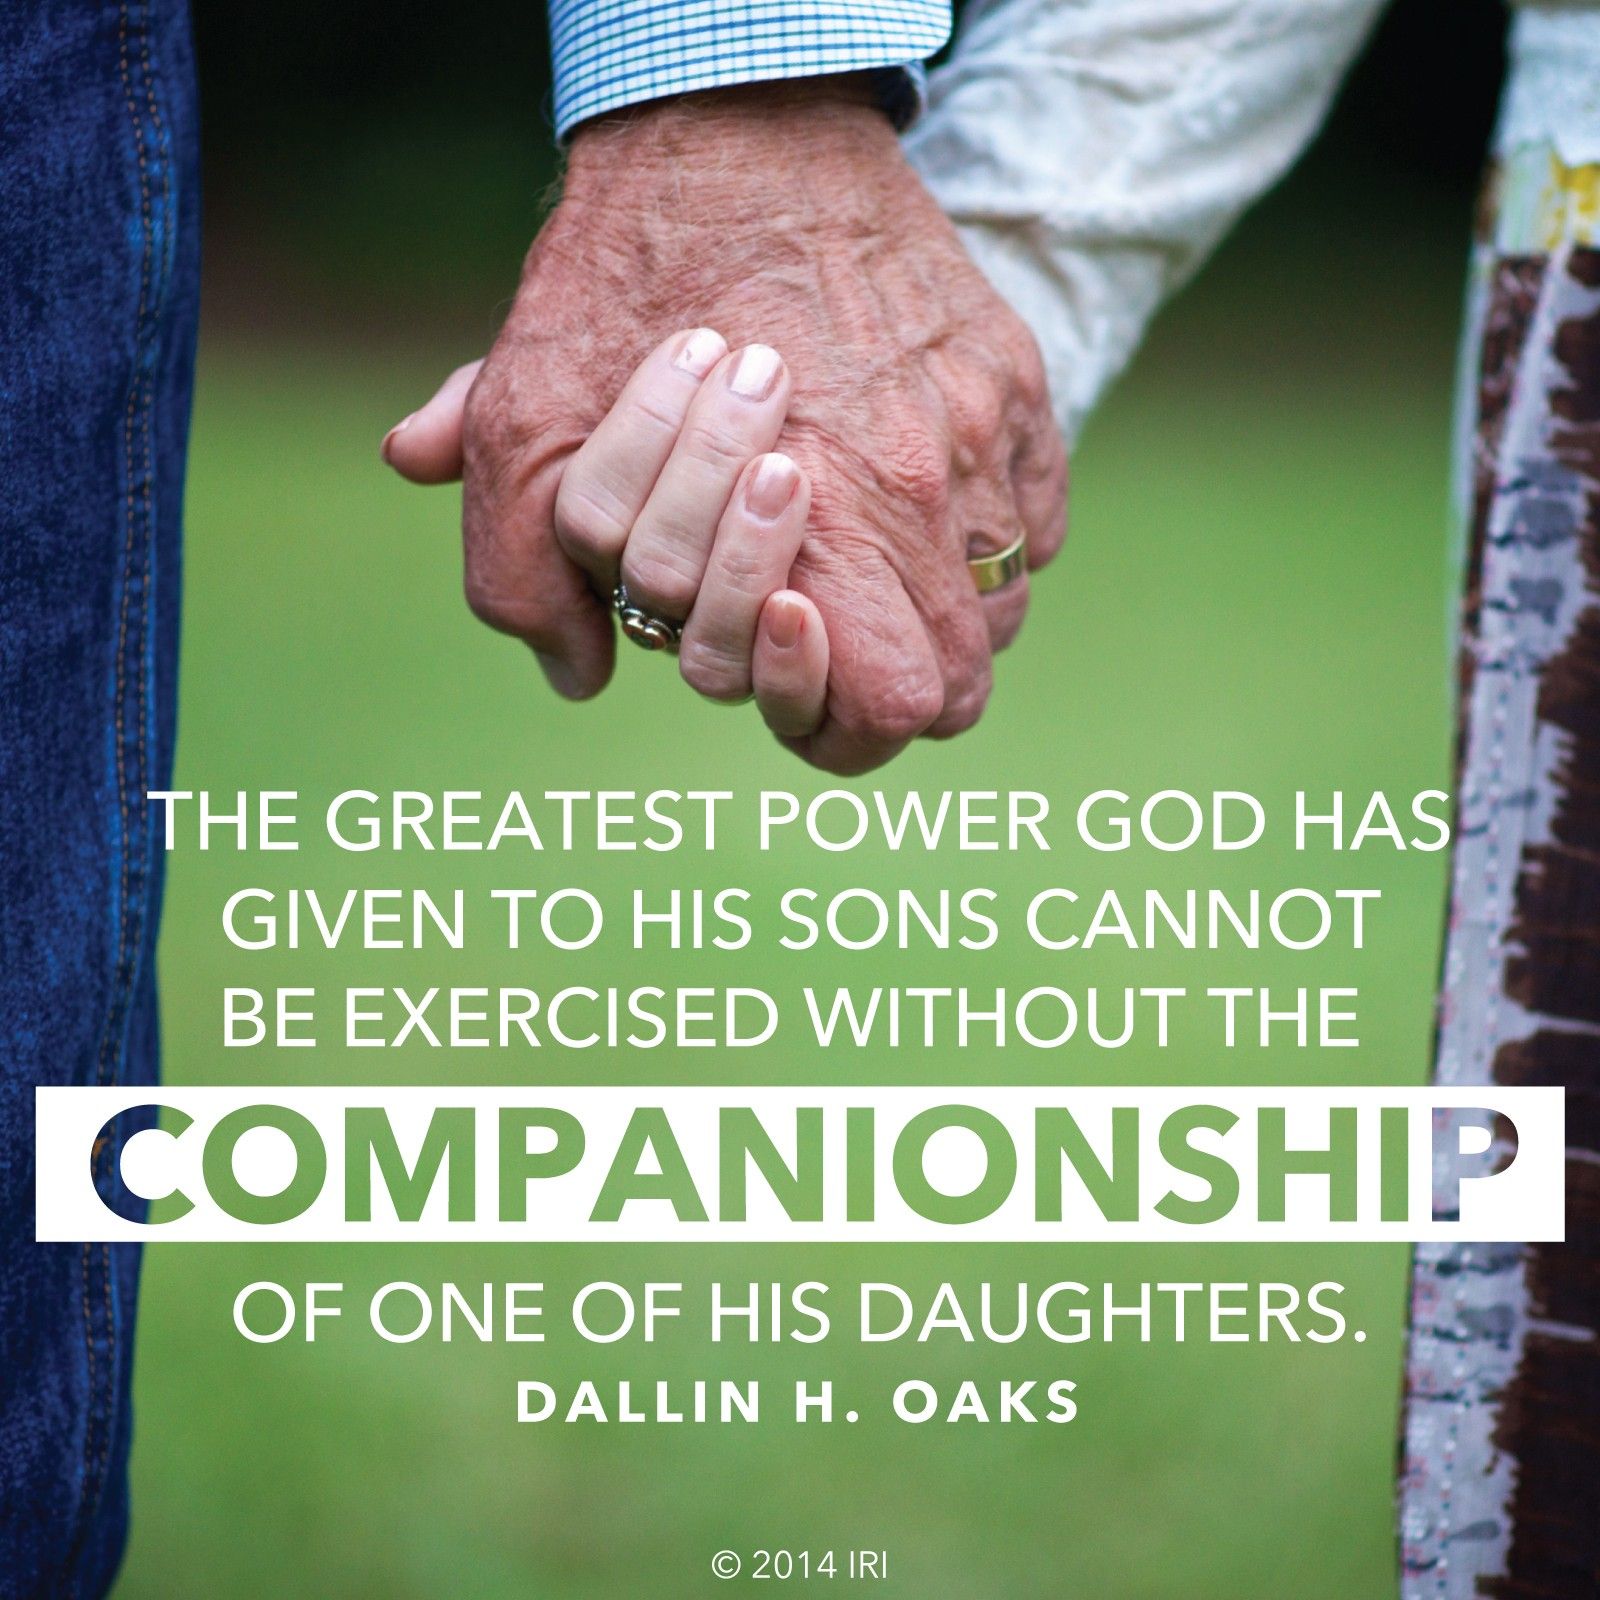 “The greatest power God has given to His sons cannot be exercised without the companionship of one of His daughters.”—Elder Dallin H. Oaks, “The Keys and Authority of the Priesthood” © undefined ipCode 1.